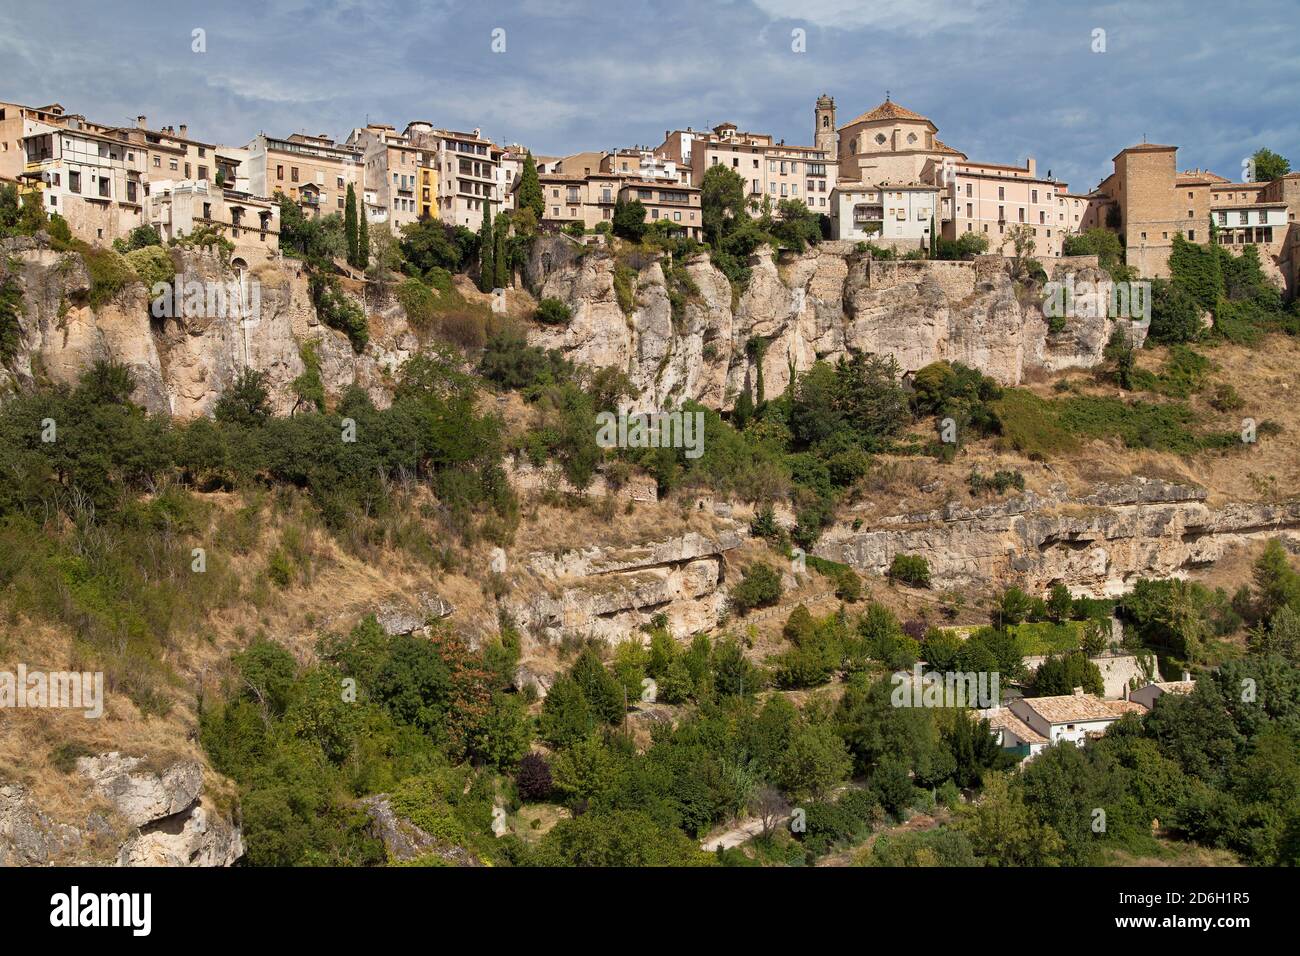 Sickle of the Huecar and Neighborhood of San Pedro in Cuenca, Spain. Stock Photo